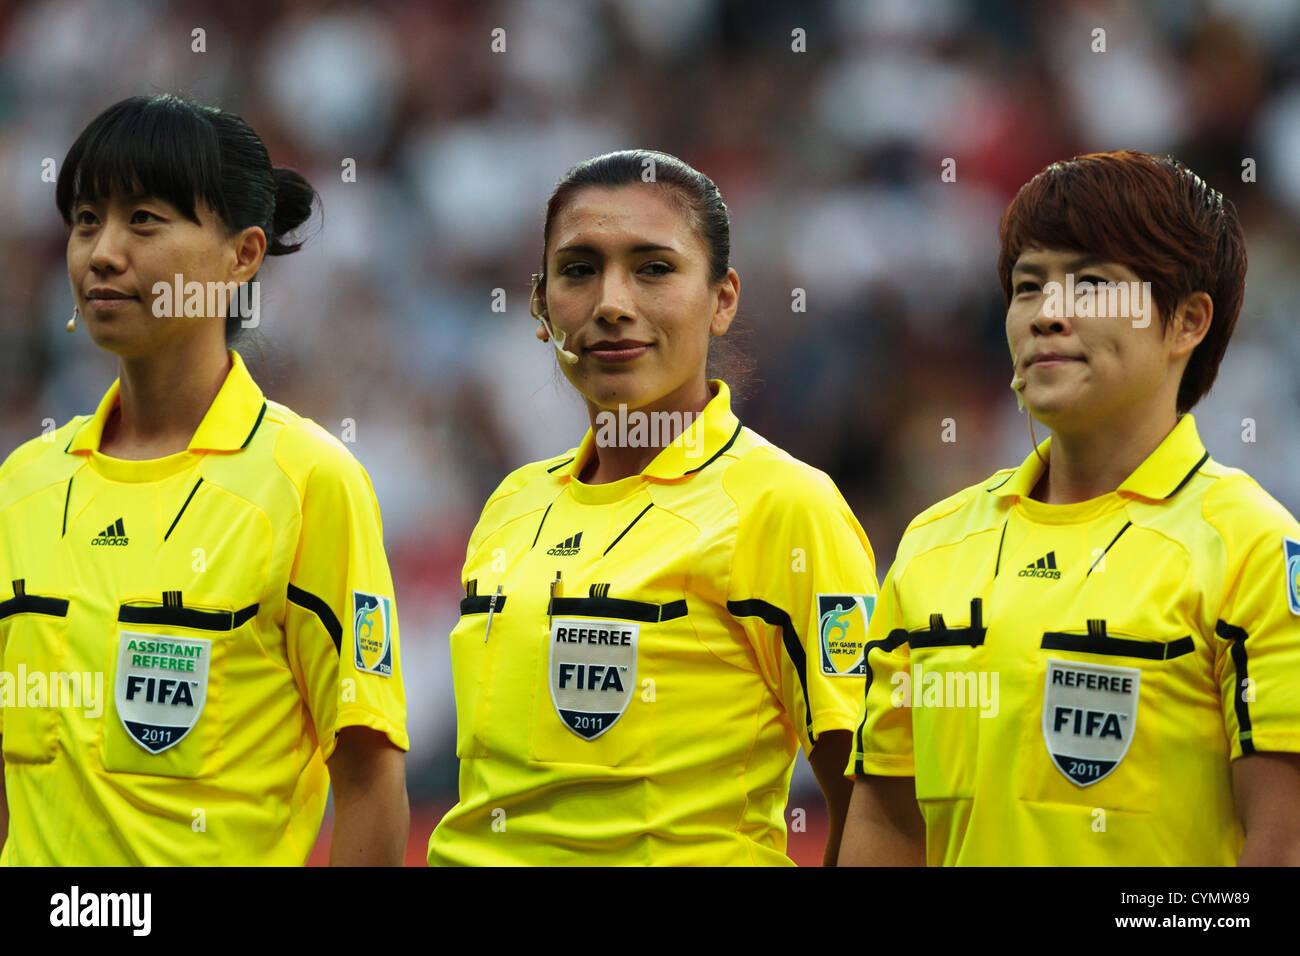 Football Referees High Resolution Stock Photography and Images - Alamy